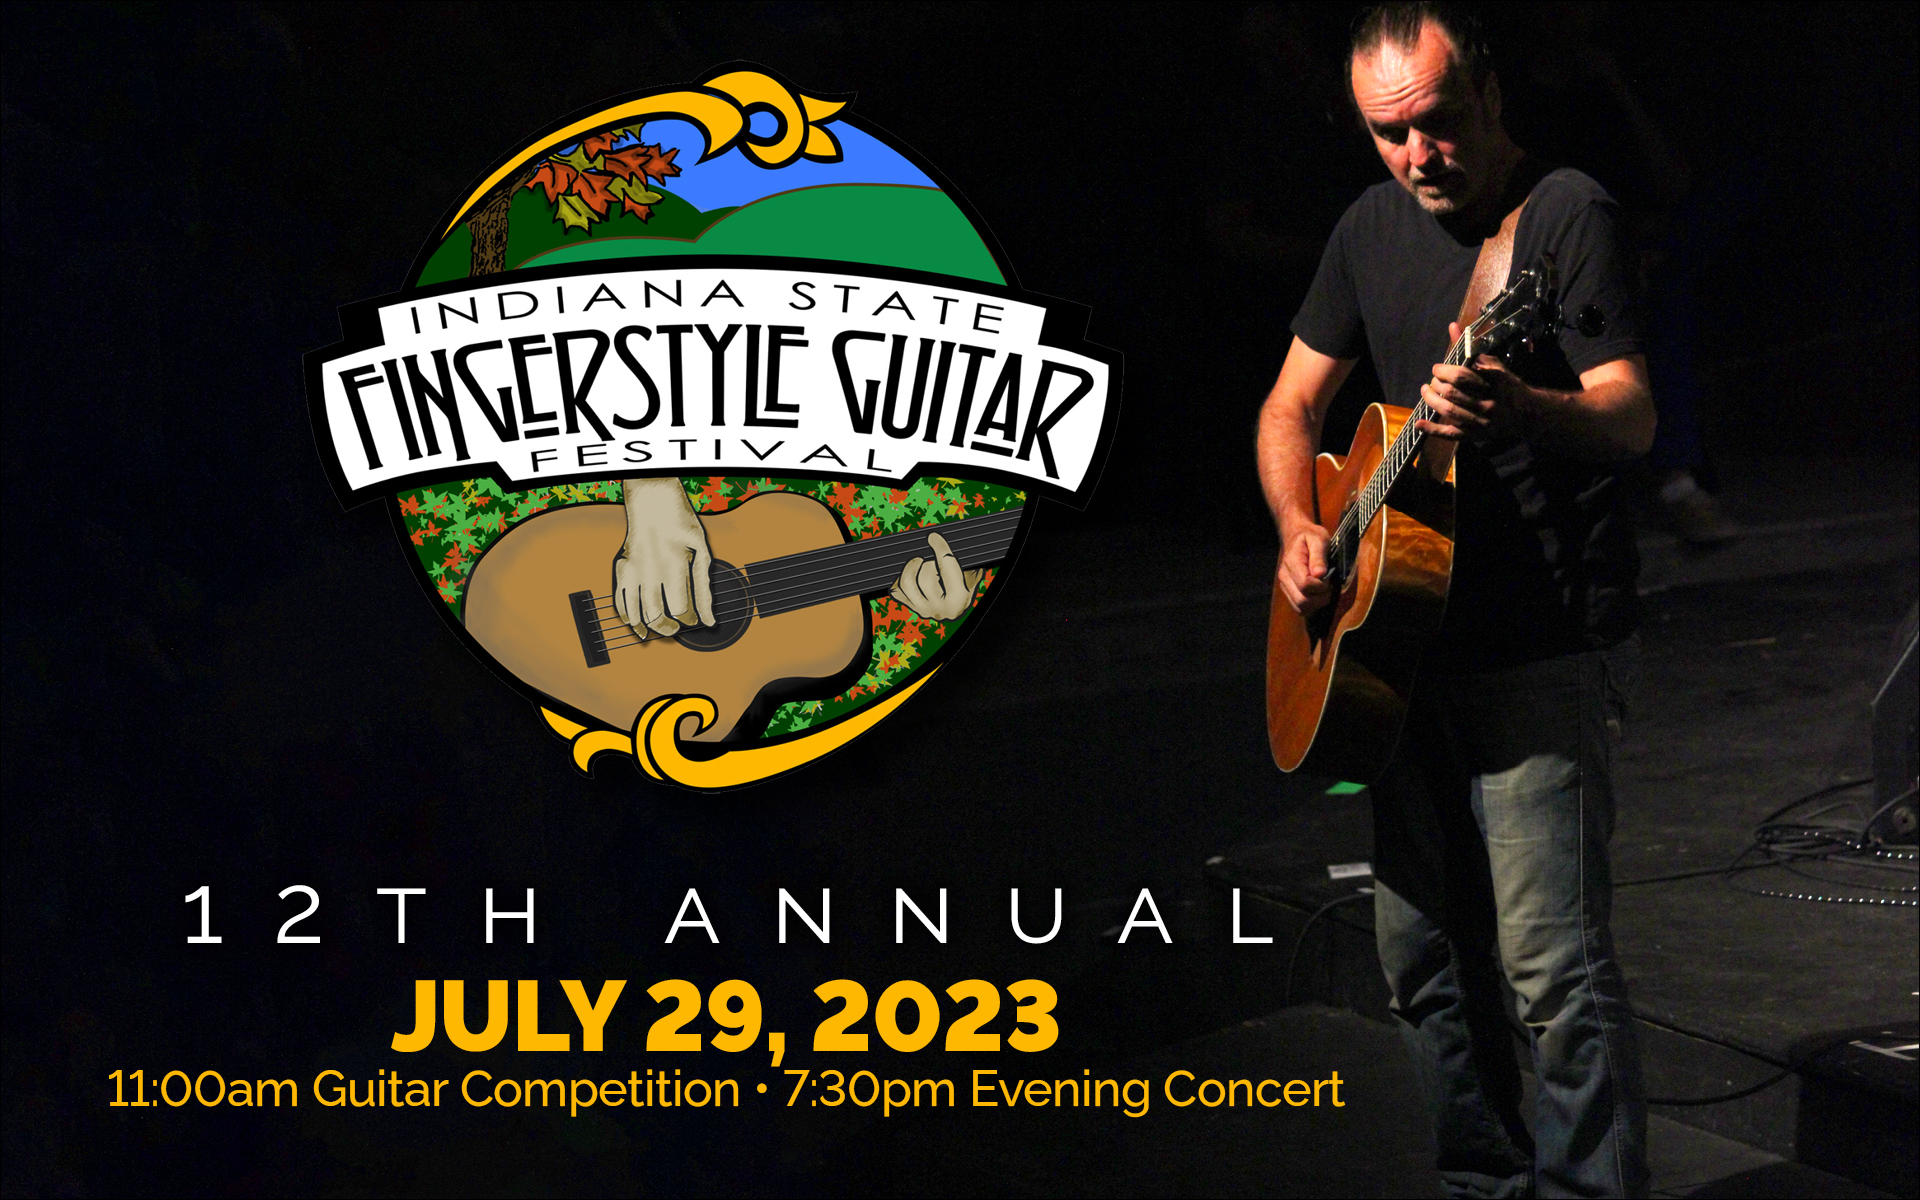 Indiana State Fingerstyle Guitar Festival - Brown County Playhouse